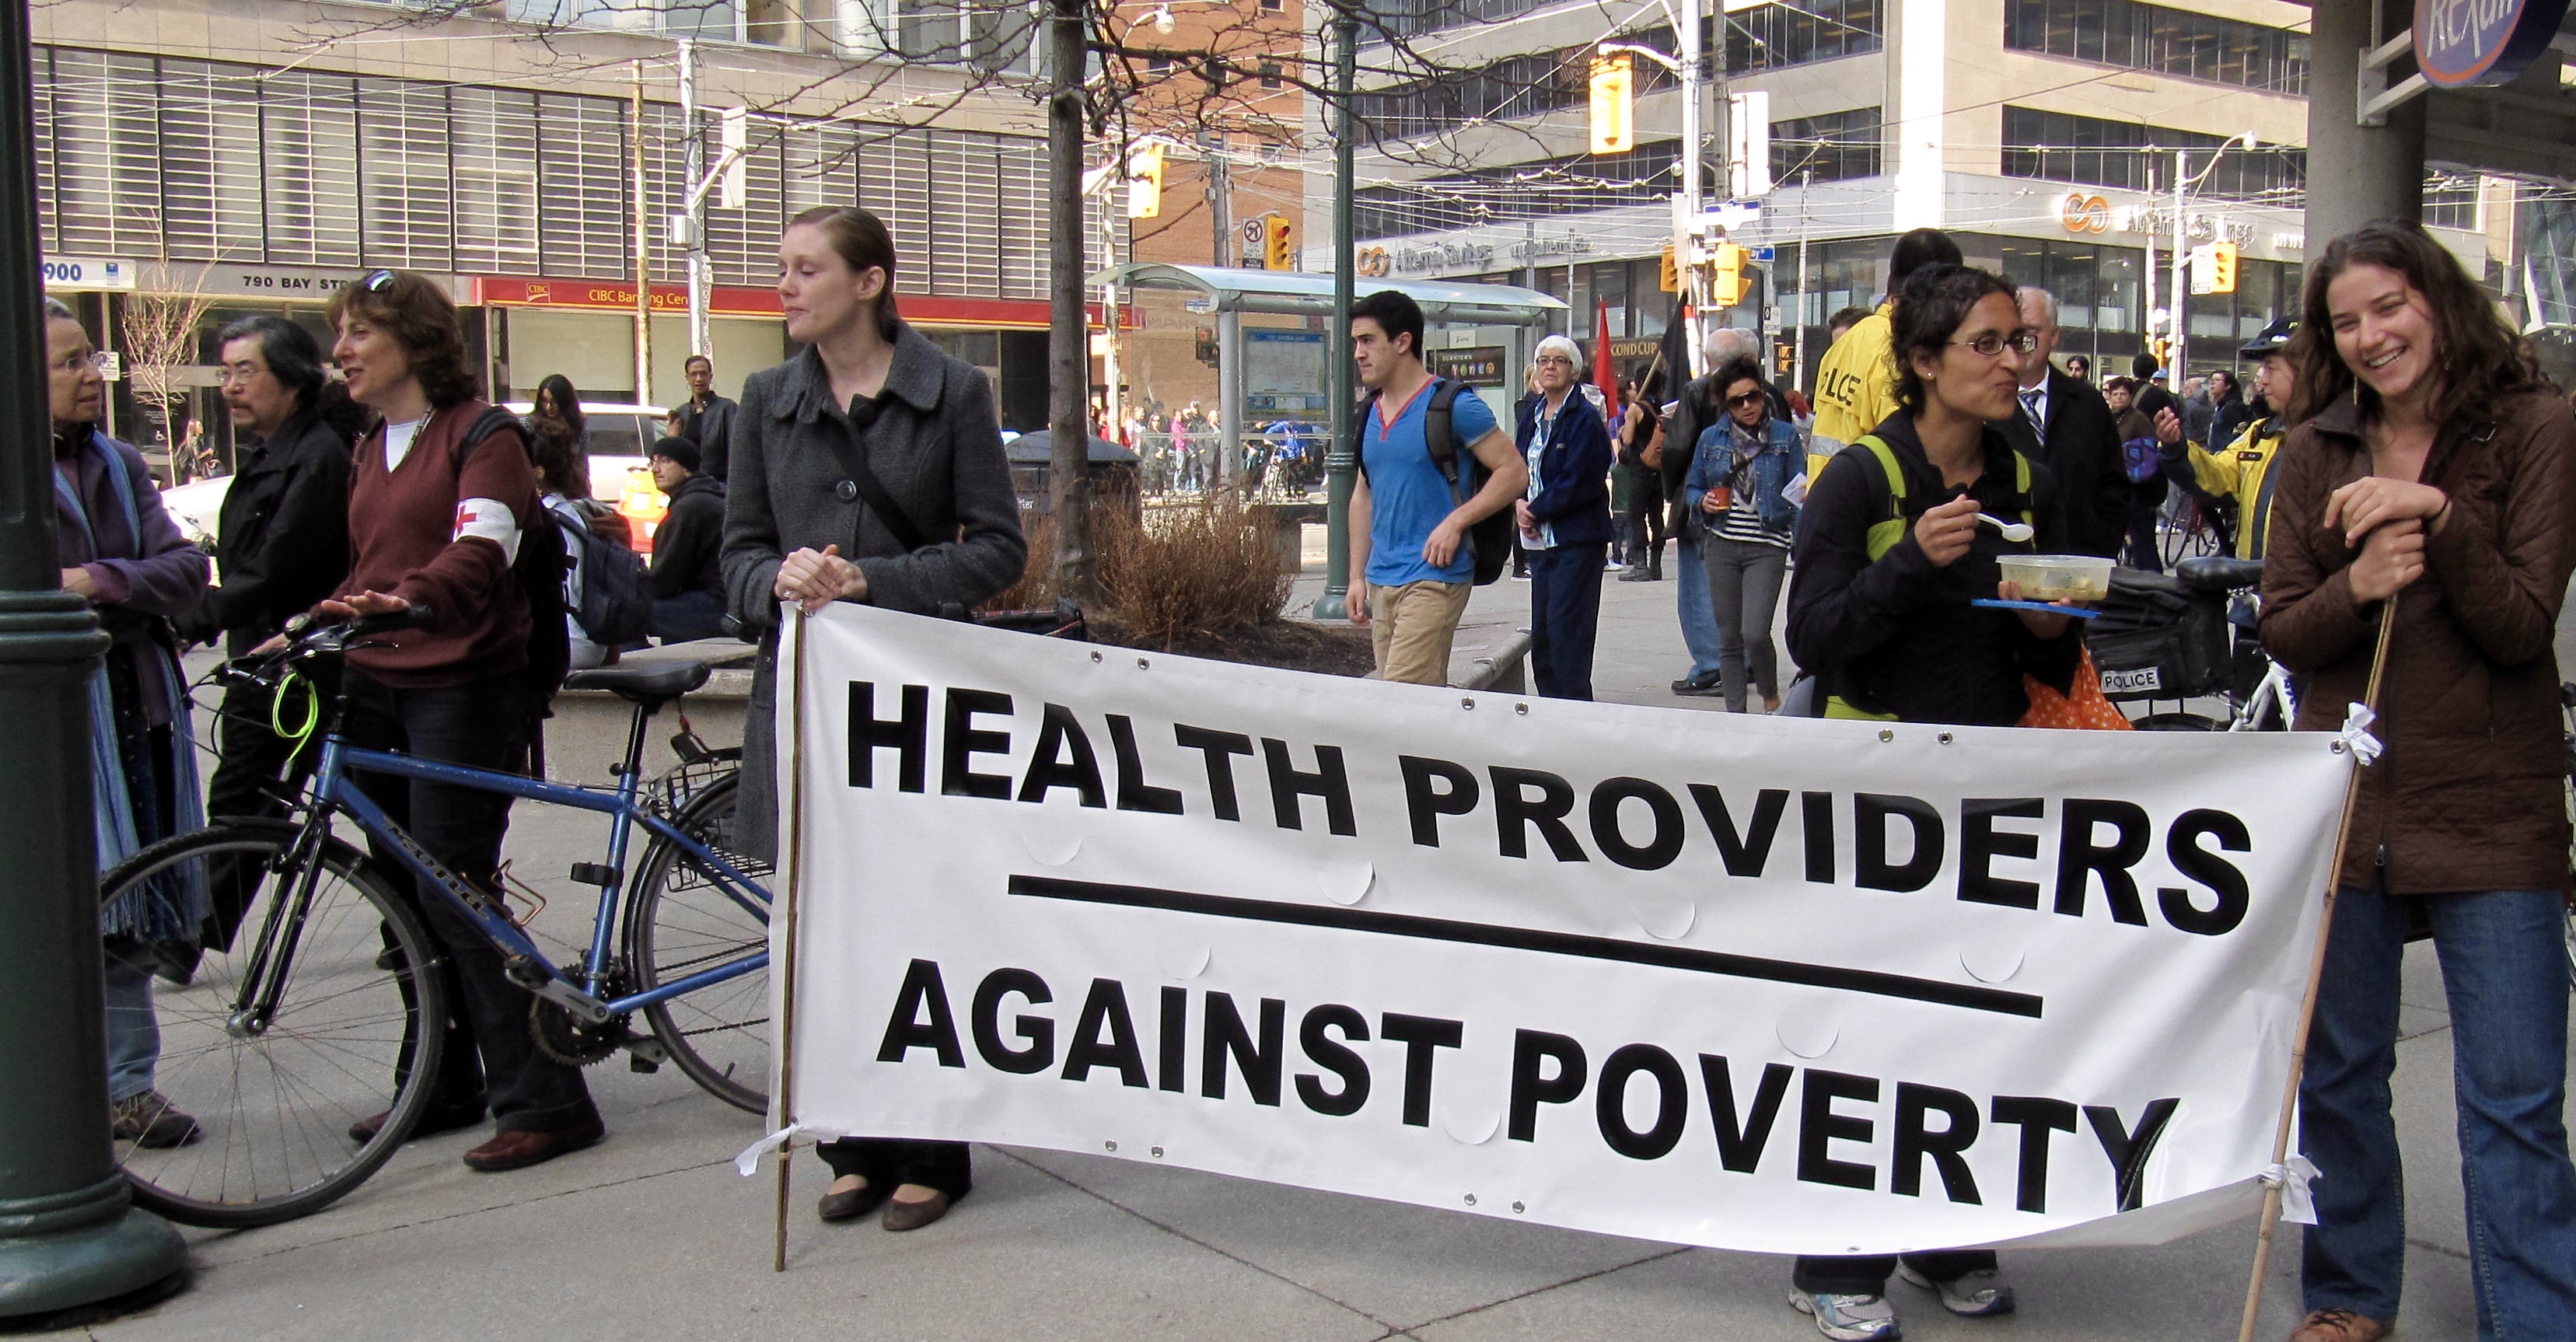 Miriam Garfinkle with Health Providers Against Poverty